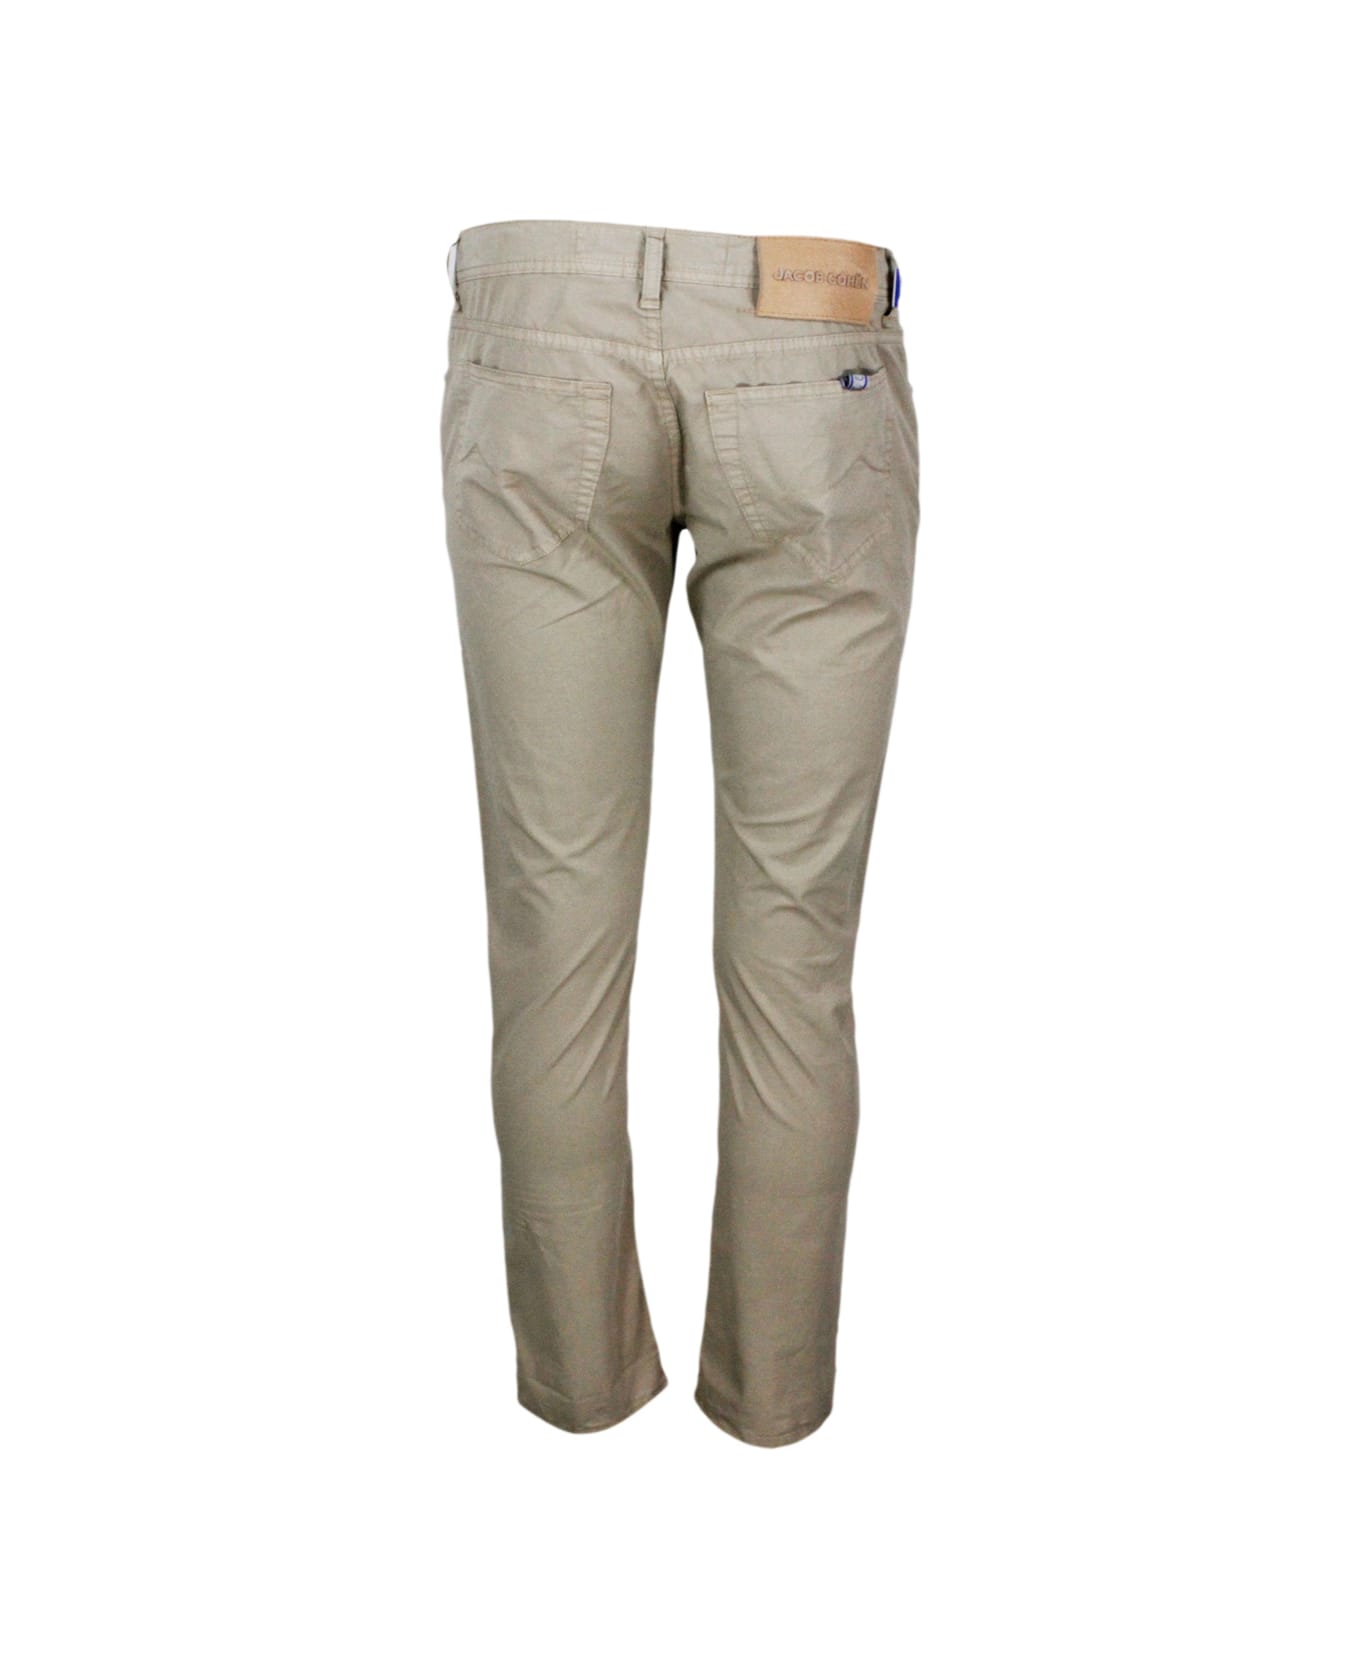 Jacob Cohen Bard J688 Luxury Edition Trousers In Soft Stretch Cotton With 5 Pockets With Closure Buttons And Lacquered Button And Pony Skin Tag With Logo - Beige